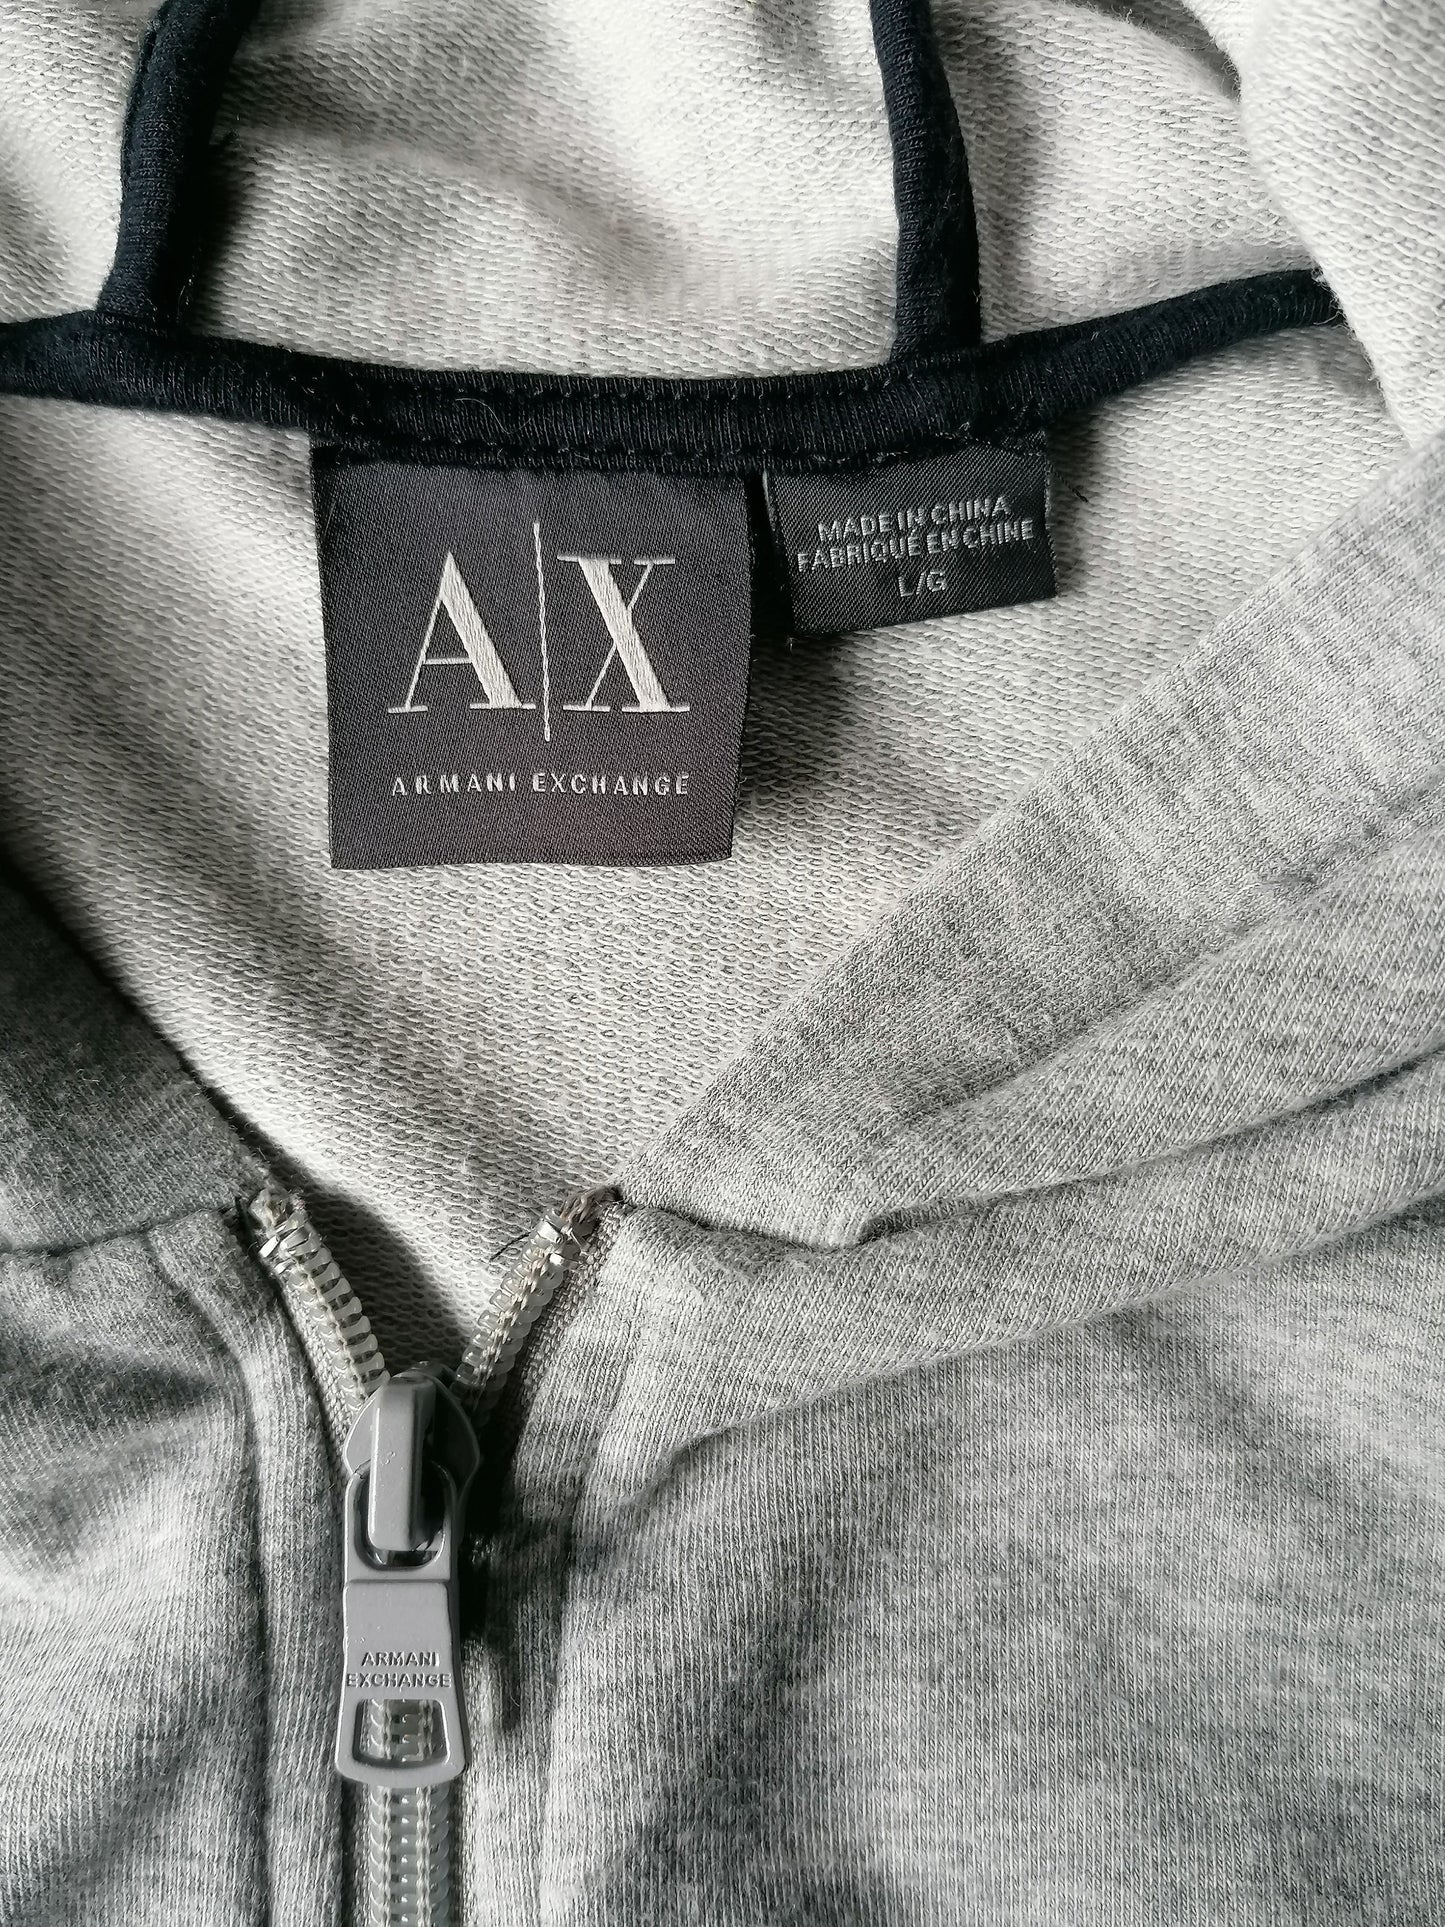 Armani Exchange body warmer with hood. Gray colored. Size L. Sweat fabric.